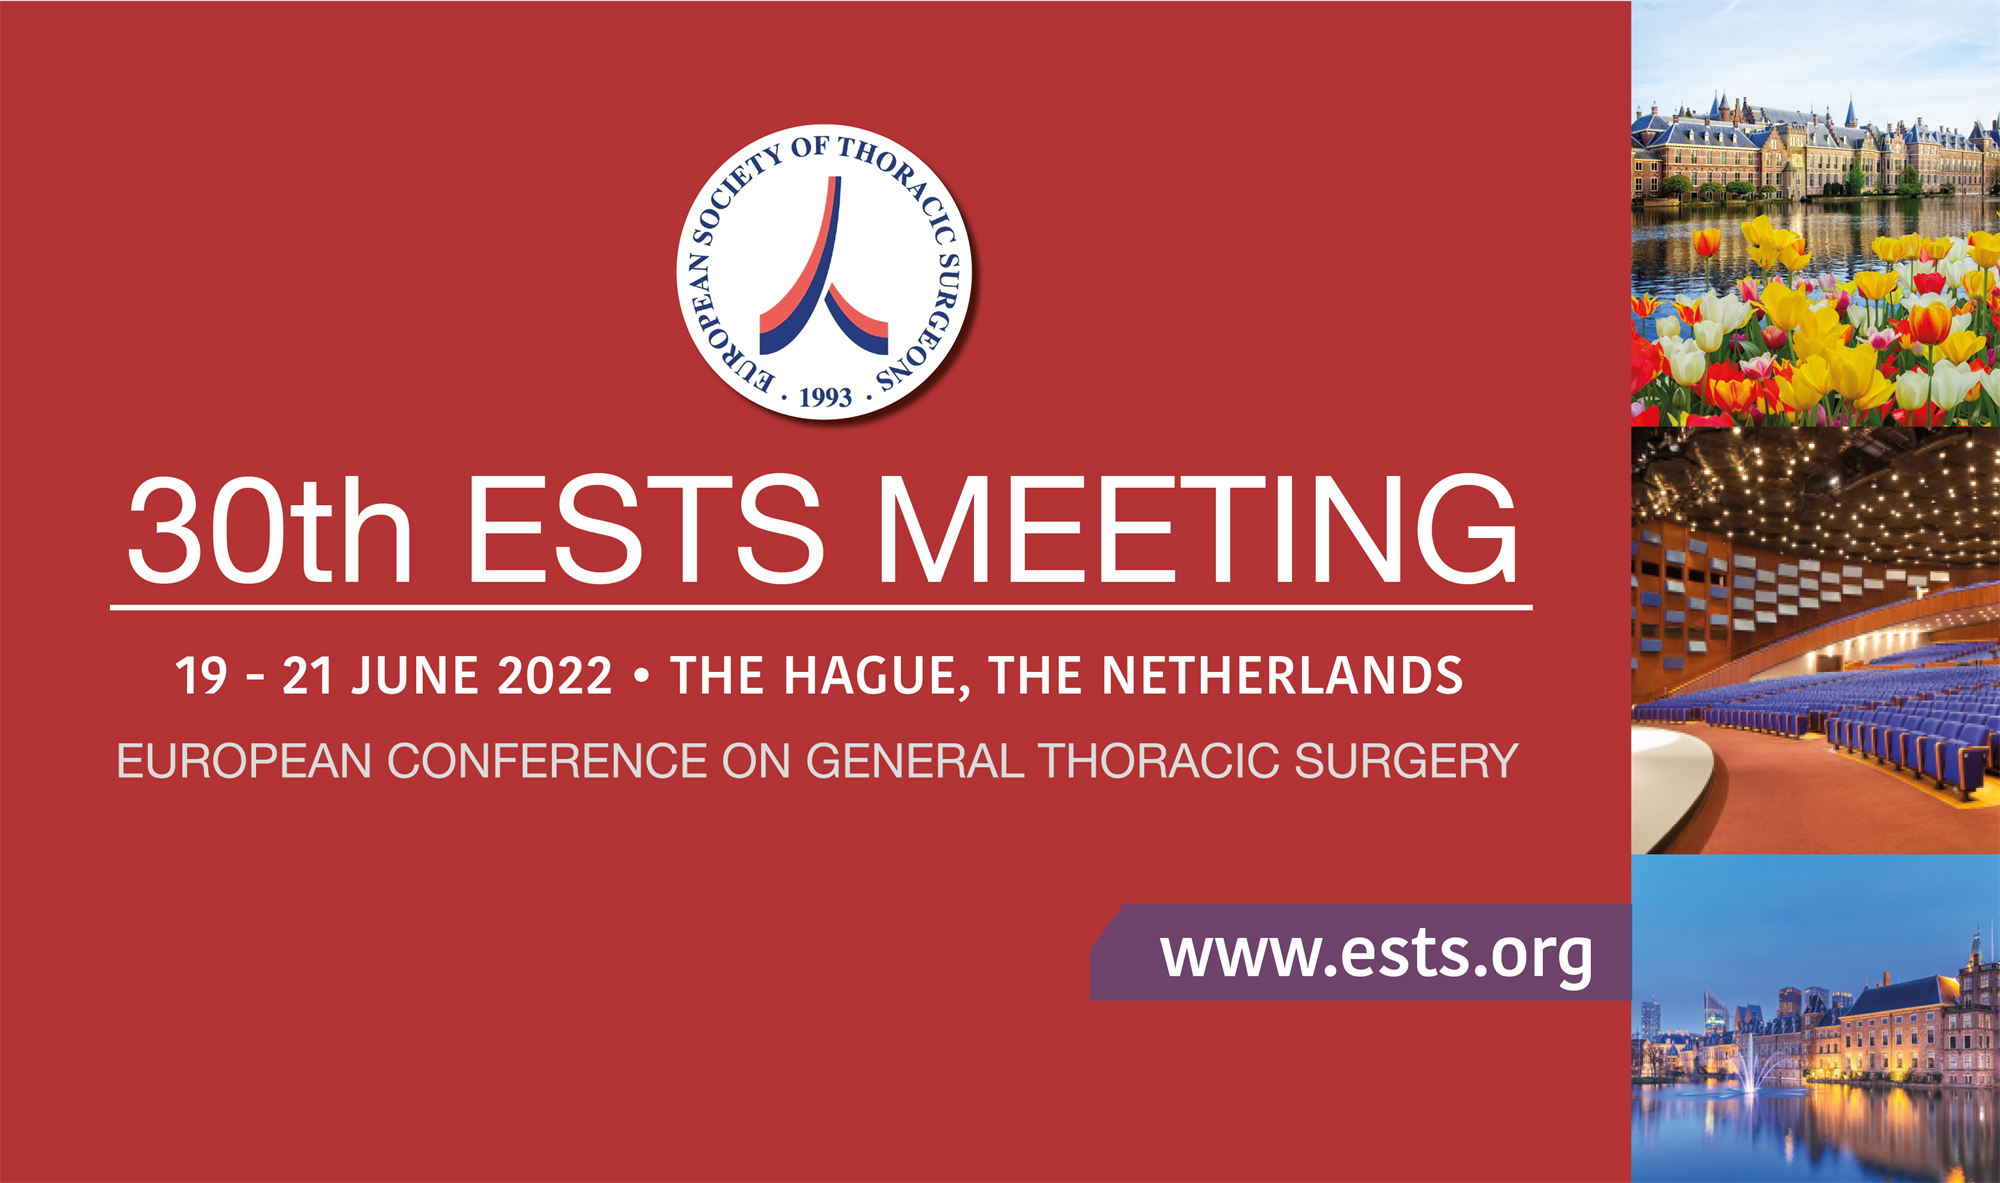 2nd Announcement now available: 30th European Conference on General Thoracic Surgery, The Hague, 19 - 21 June 2022 image